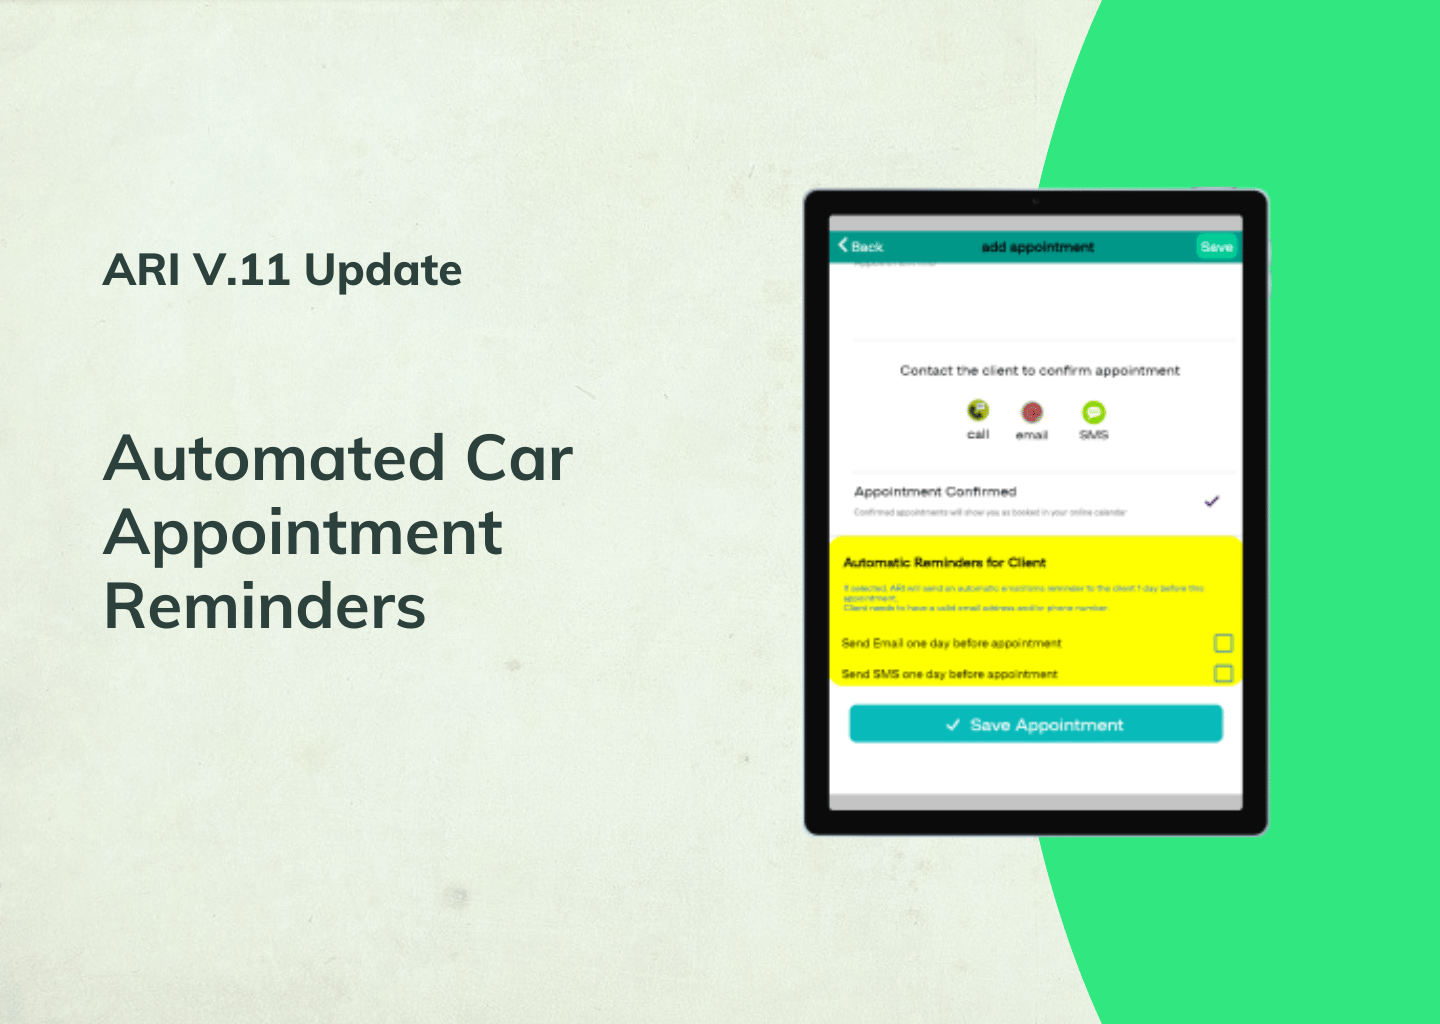 Automated Car Appointment Reminders (new feature in ARI v.11)